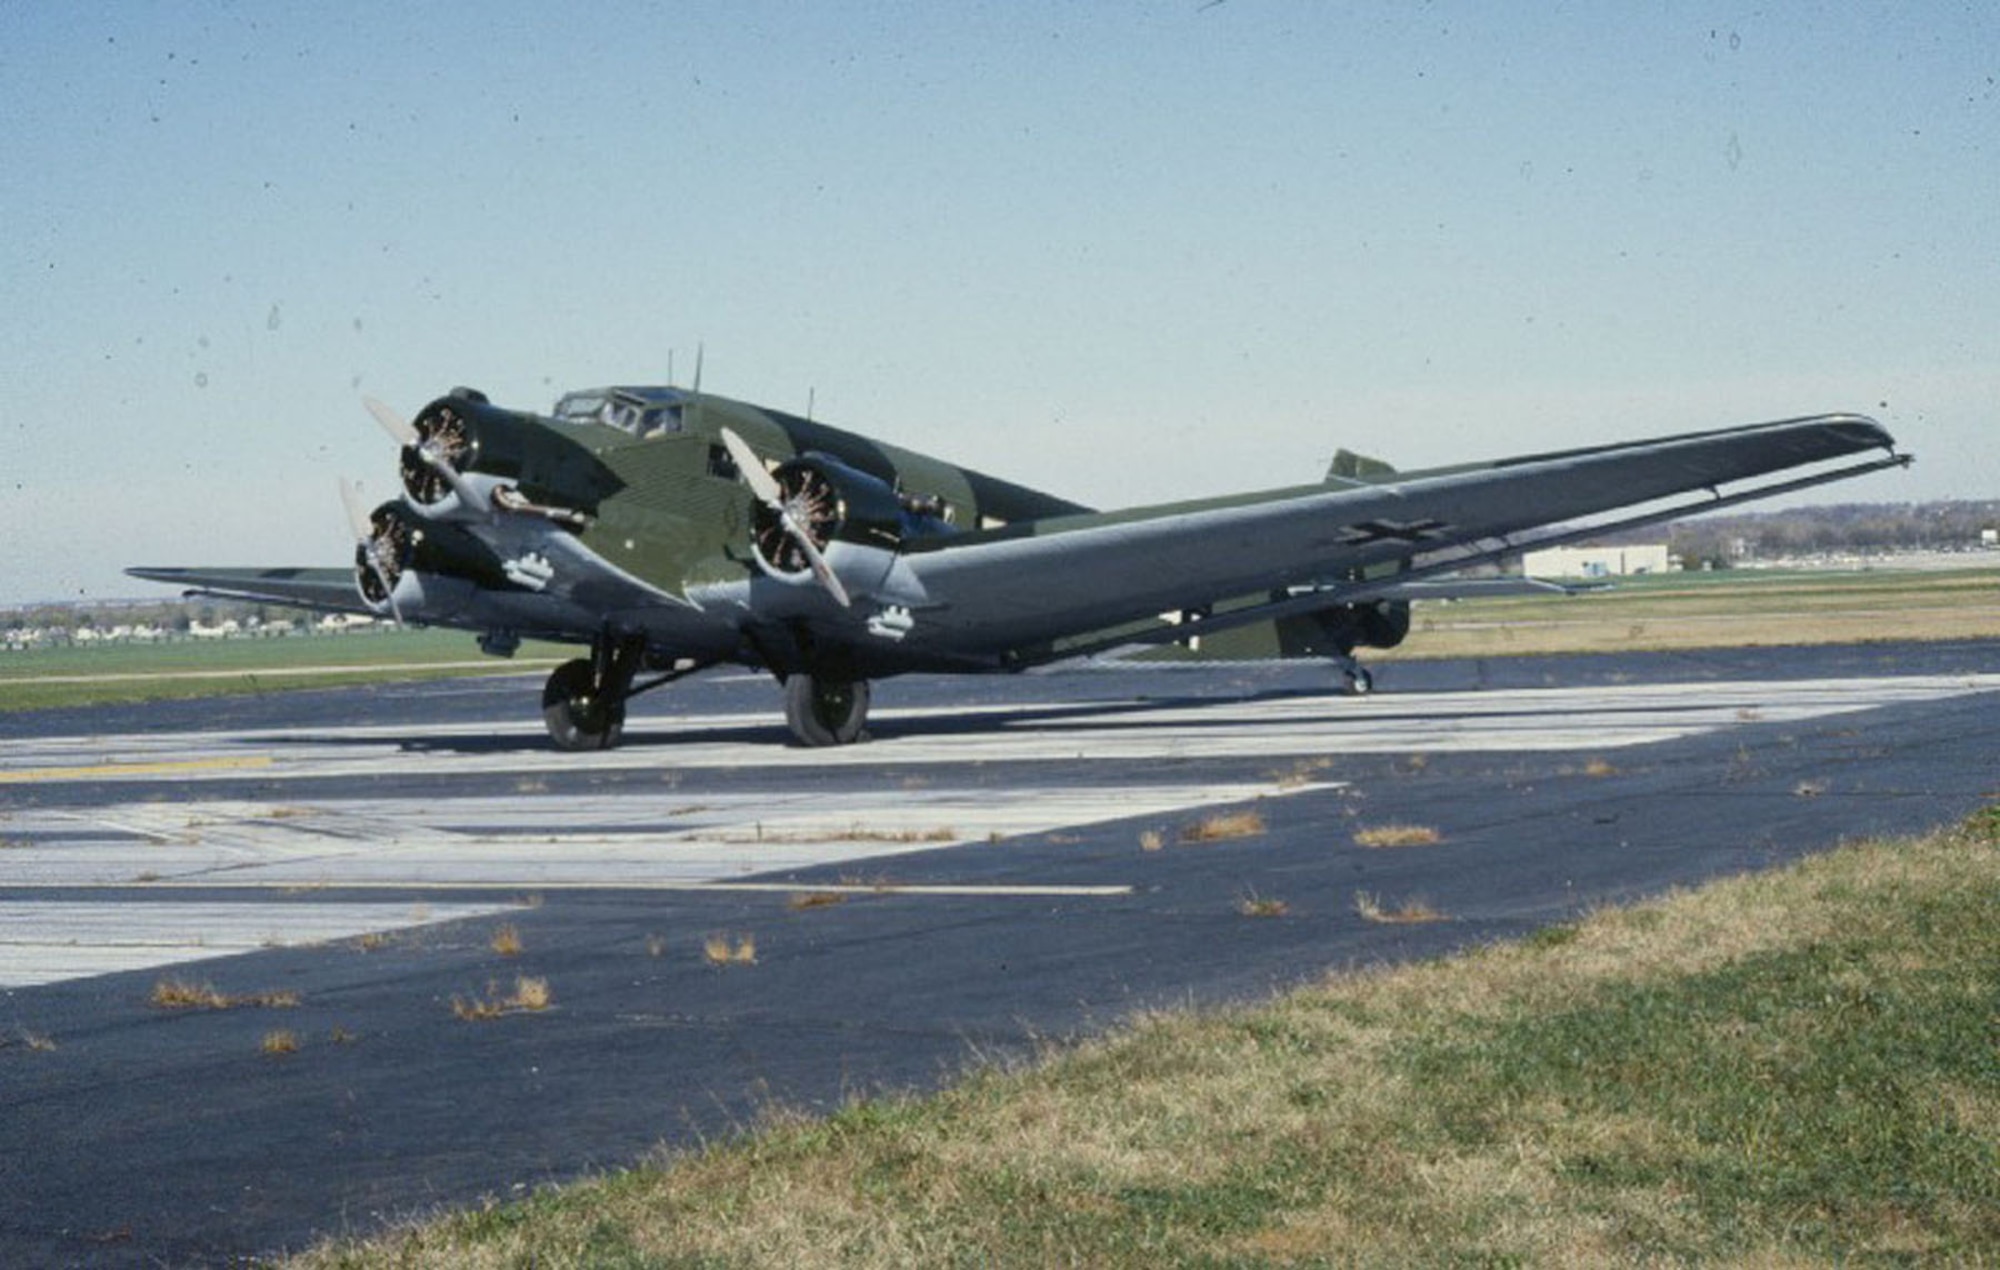 DAYTON, Ohio -- Junkers Ju 52 at the National Museum of the United States Air Force. (U.S. Air Force photo)